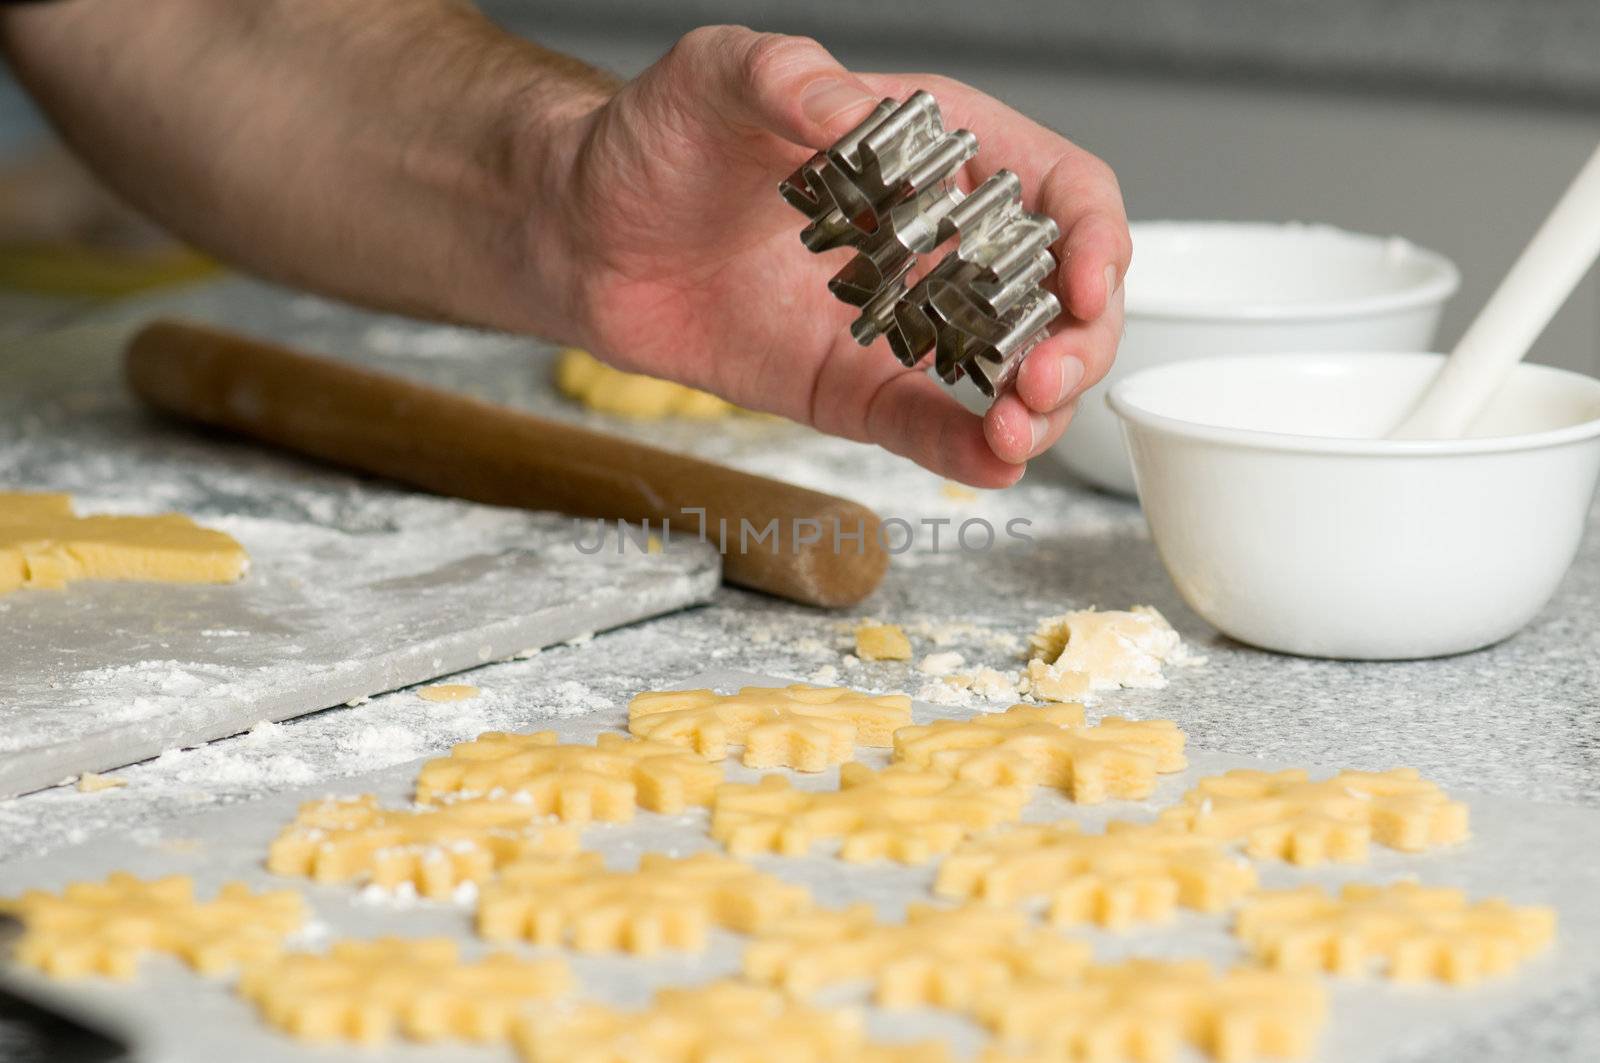 Placing star shape cookies after cutting on backing paper